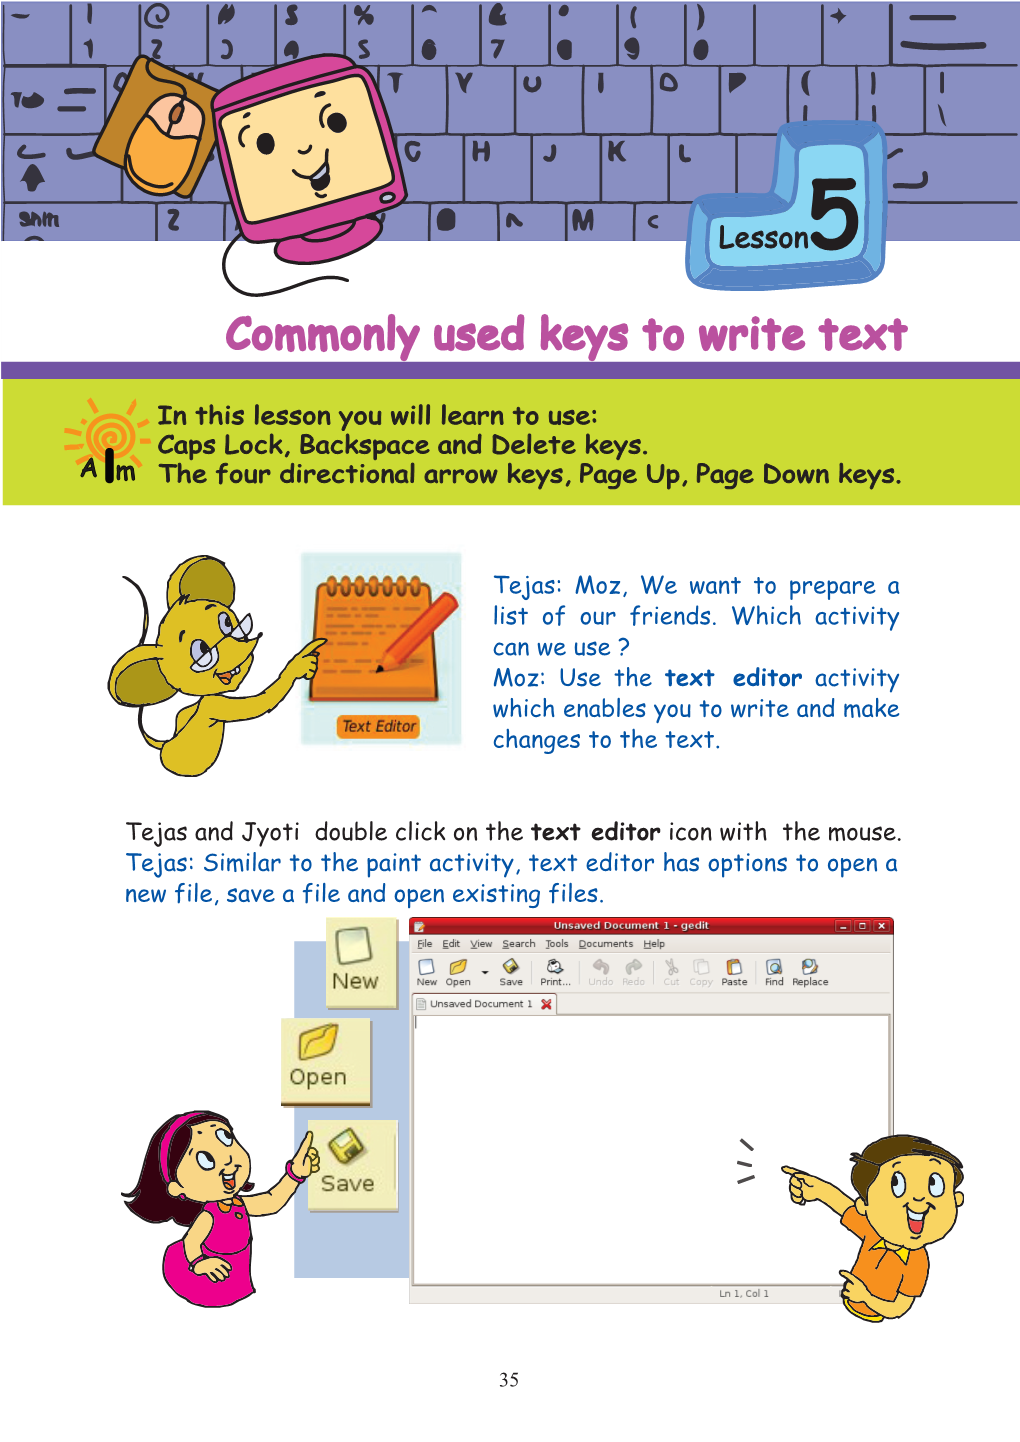 Commonly Used Keys to Write Text